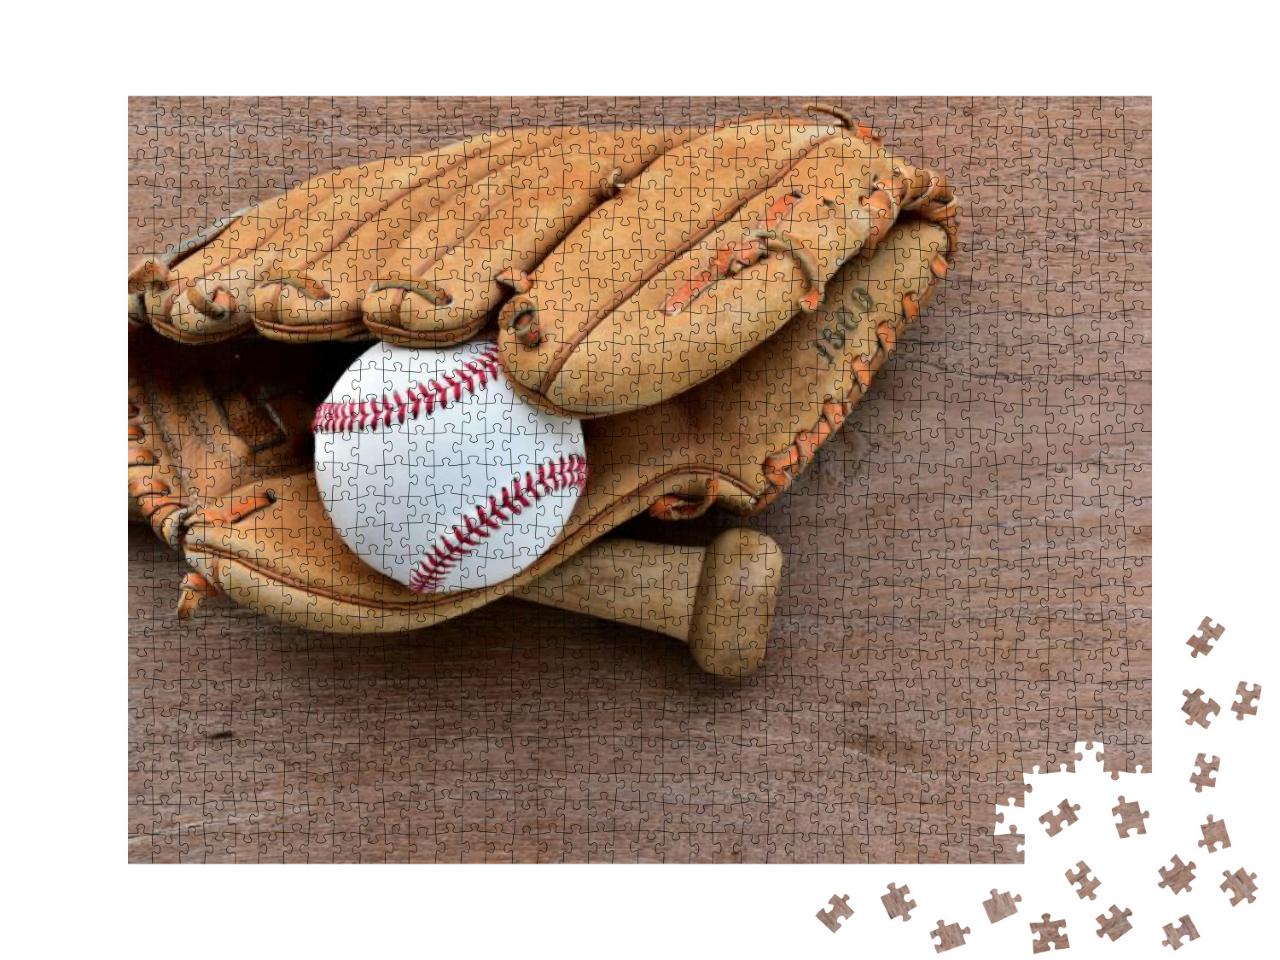 A Close Up Image of an Old Used Baseball, Baseball Bat &... Jigsaw Puzzle with 1000 pieces